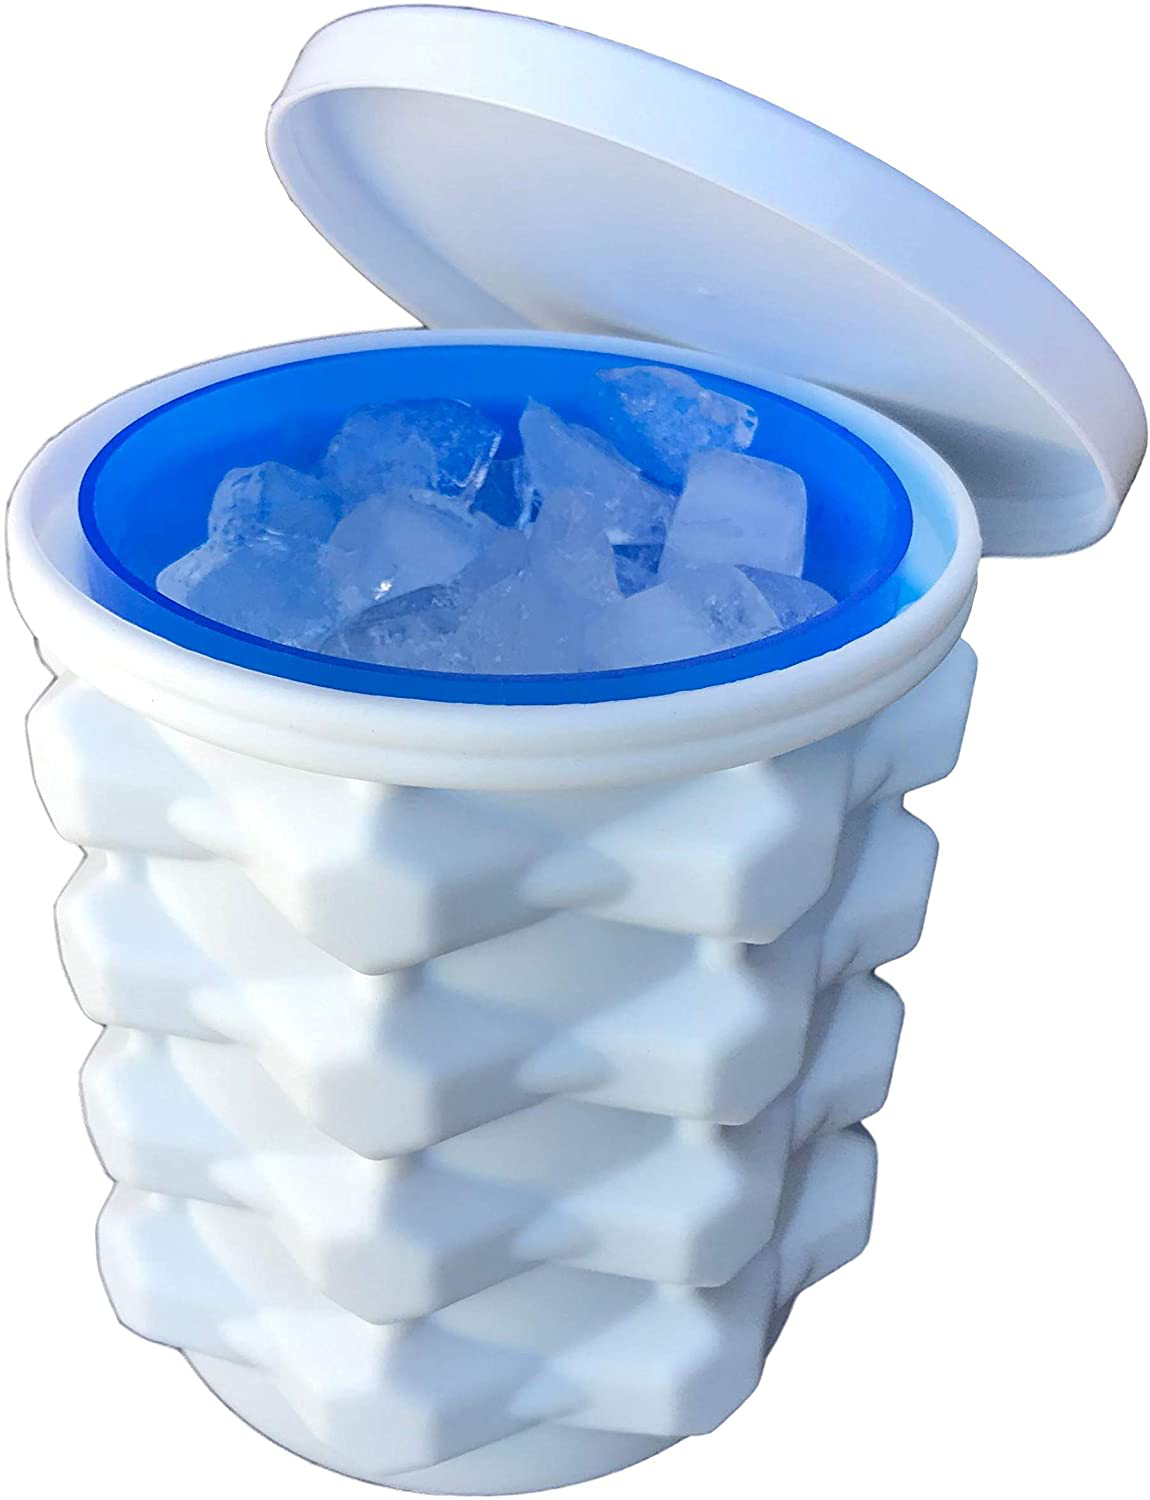 The Ultimate Ice Cube Maker Silicone Bucket With Lid Makes Small Size Reliable Store